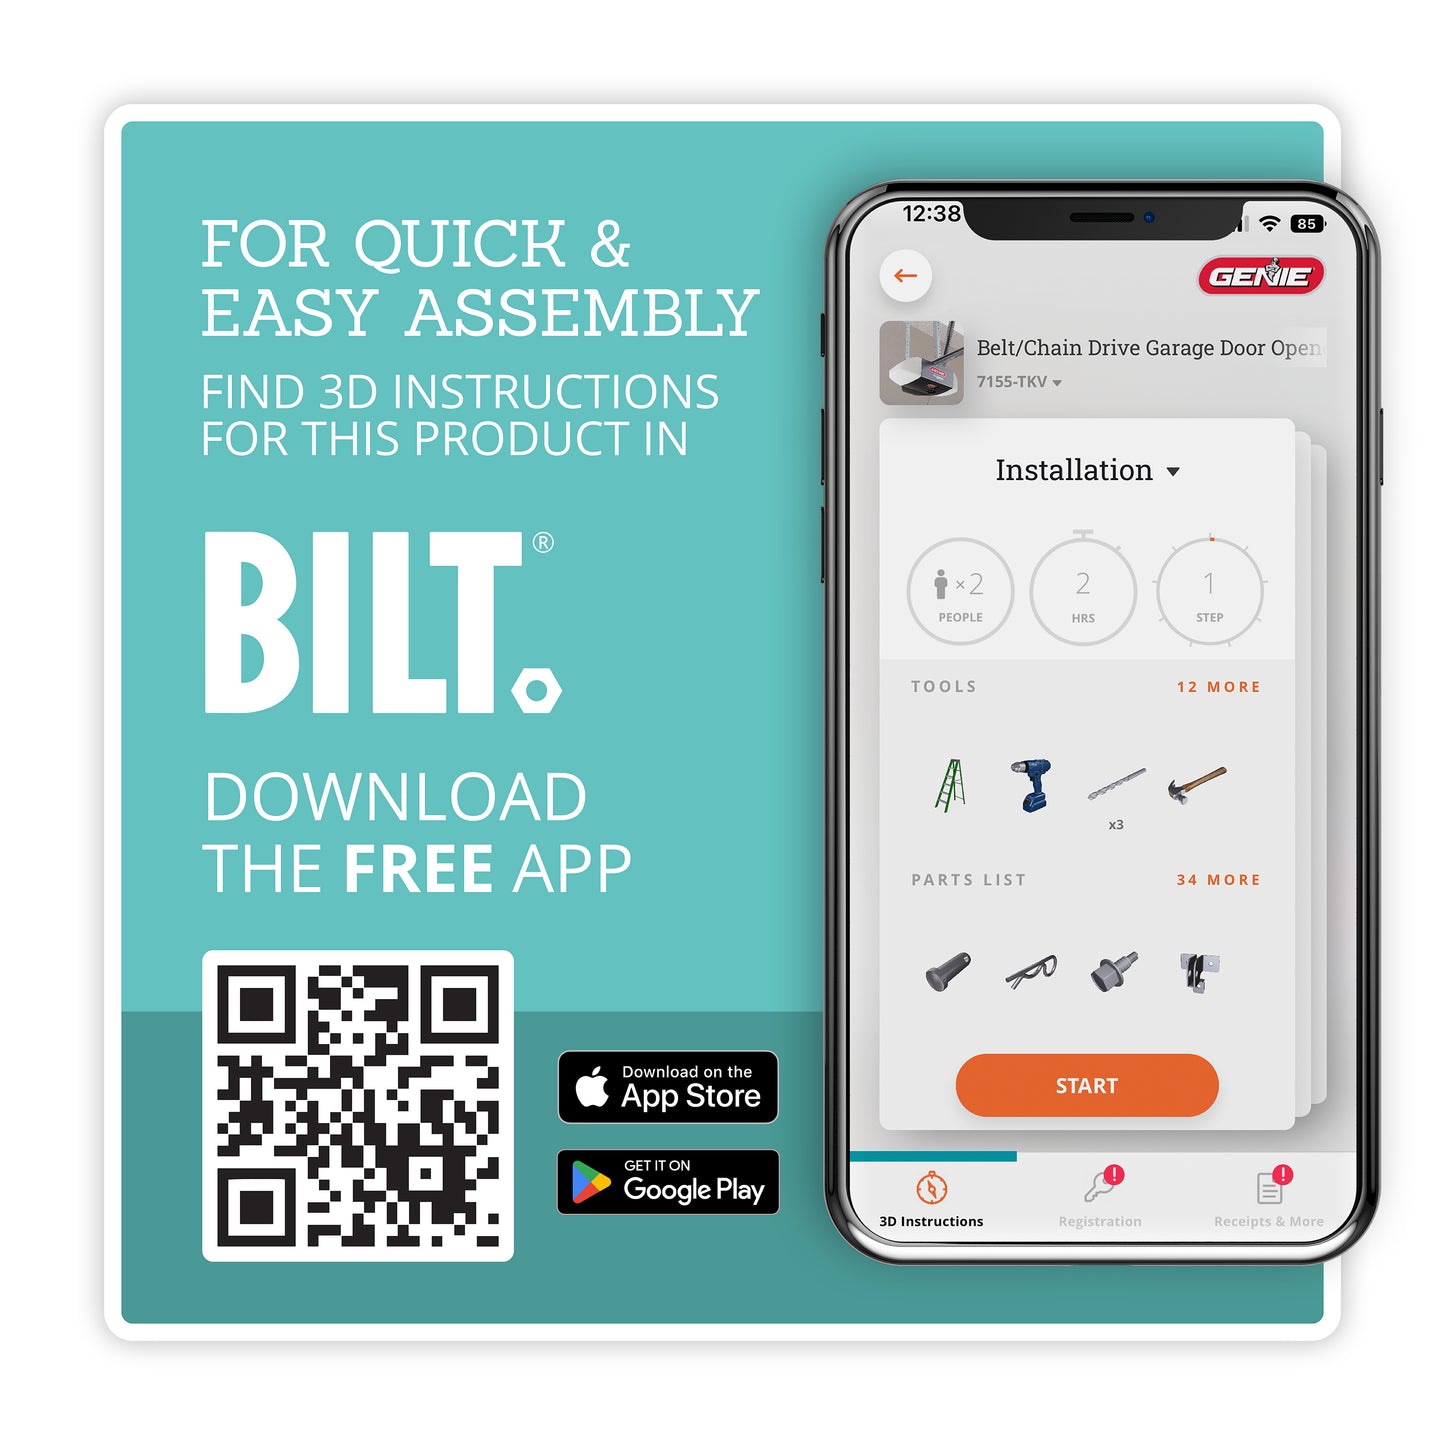 BILT App quick and easy assembly instructions for Genie garage door openers